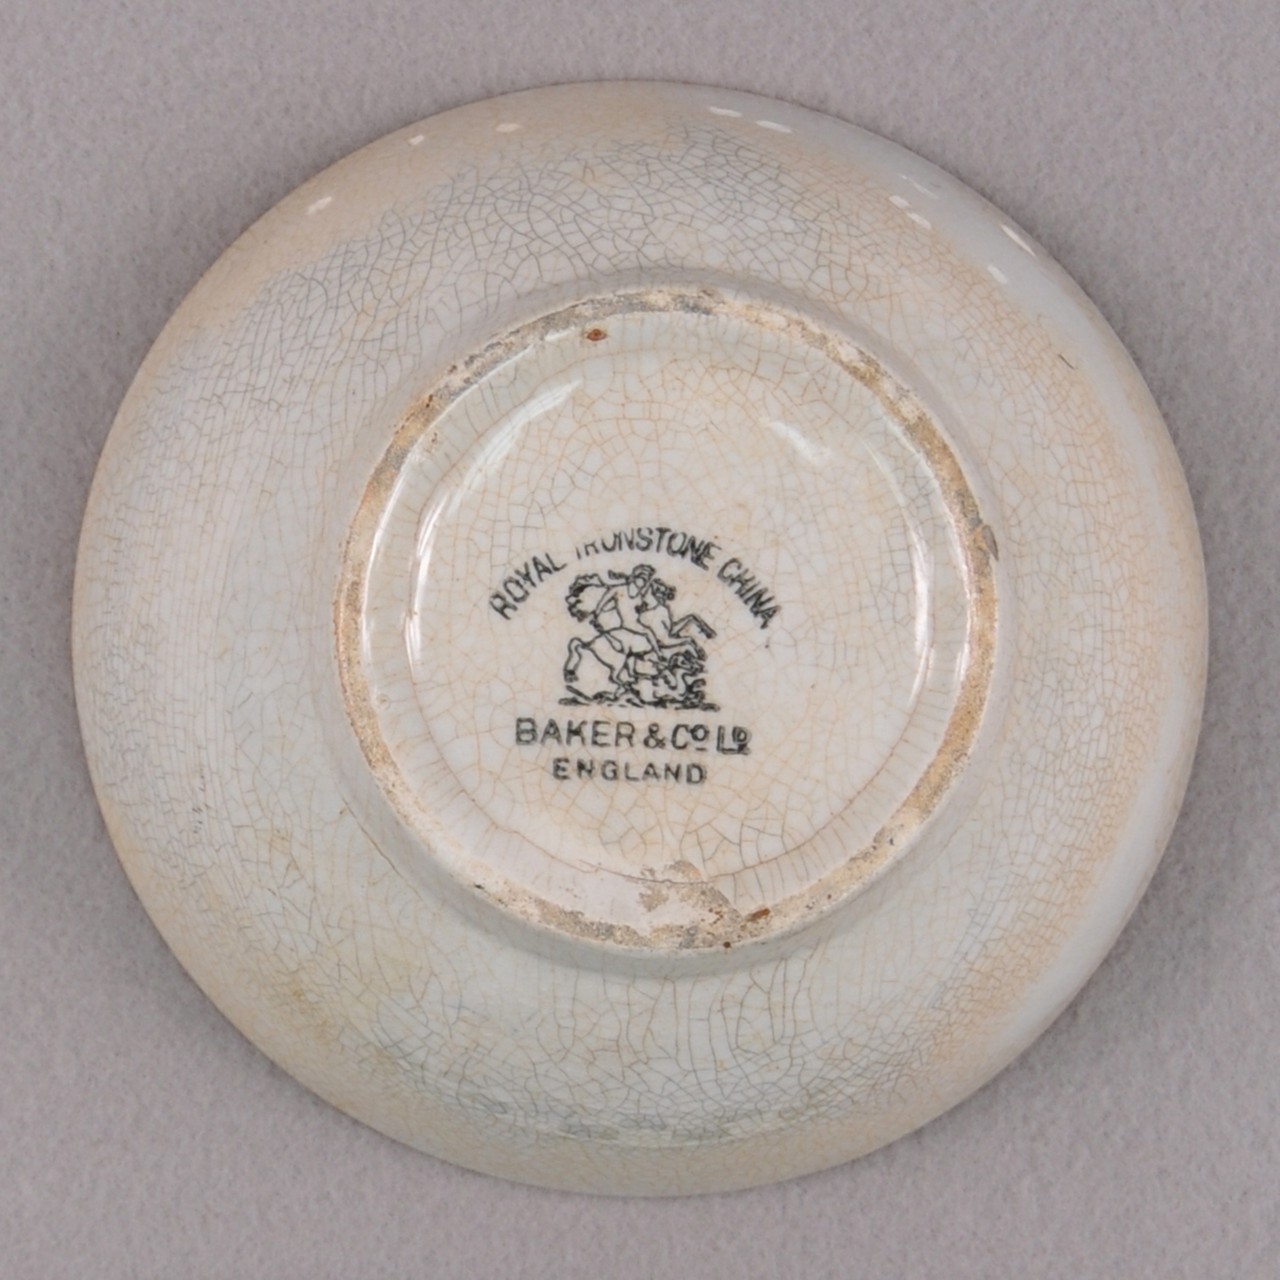 <p>An undecorated white stoneware bowl with cracked glaze from USS San Diego. A maker’s mark of a man riding a horse and the words “Royal Ironstone China” and “Baker &amp; Co Ltd. England” around the mark located at the bowl’s base.</p>